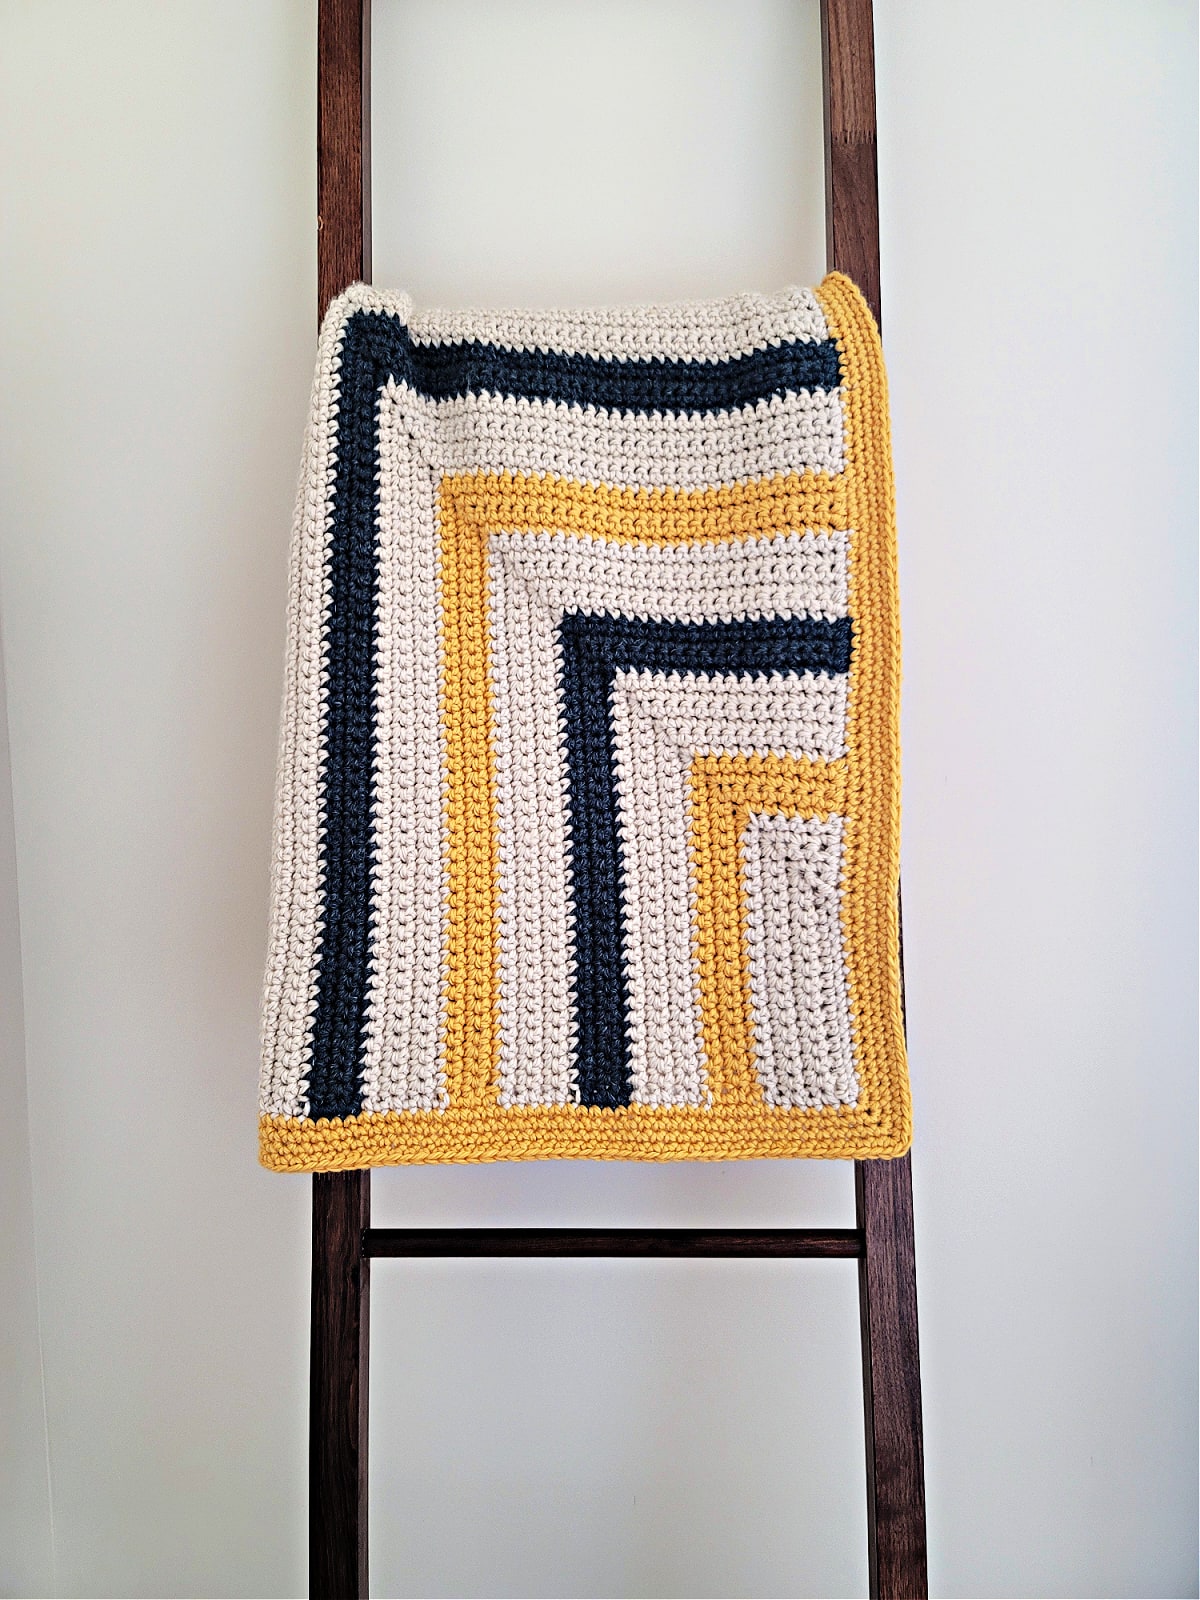 A chunky striped crochet blanket folded and draped over a wood blanket ladder.